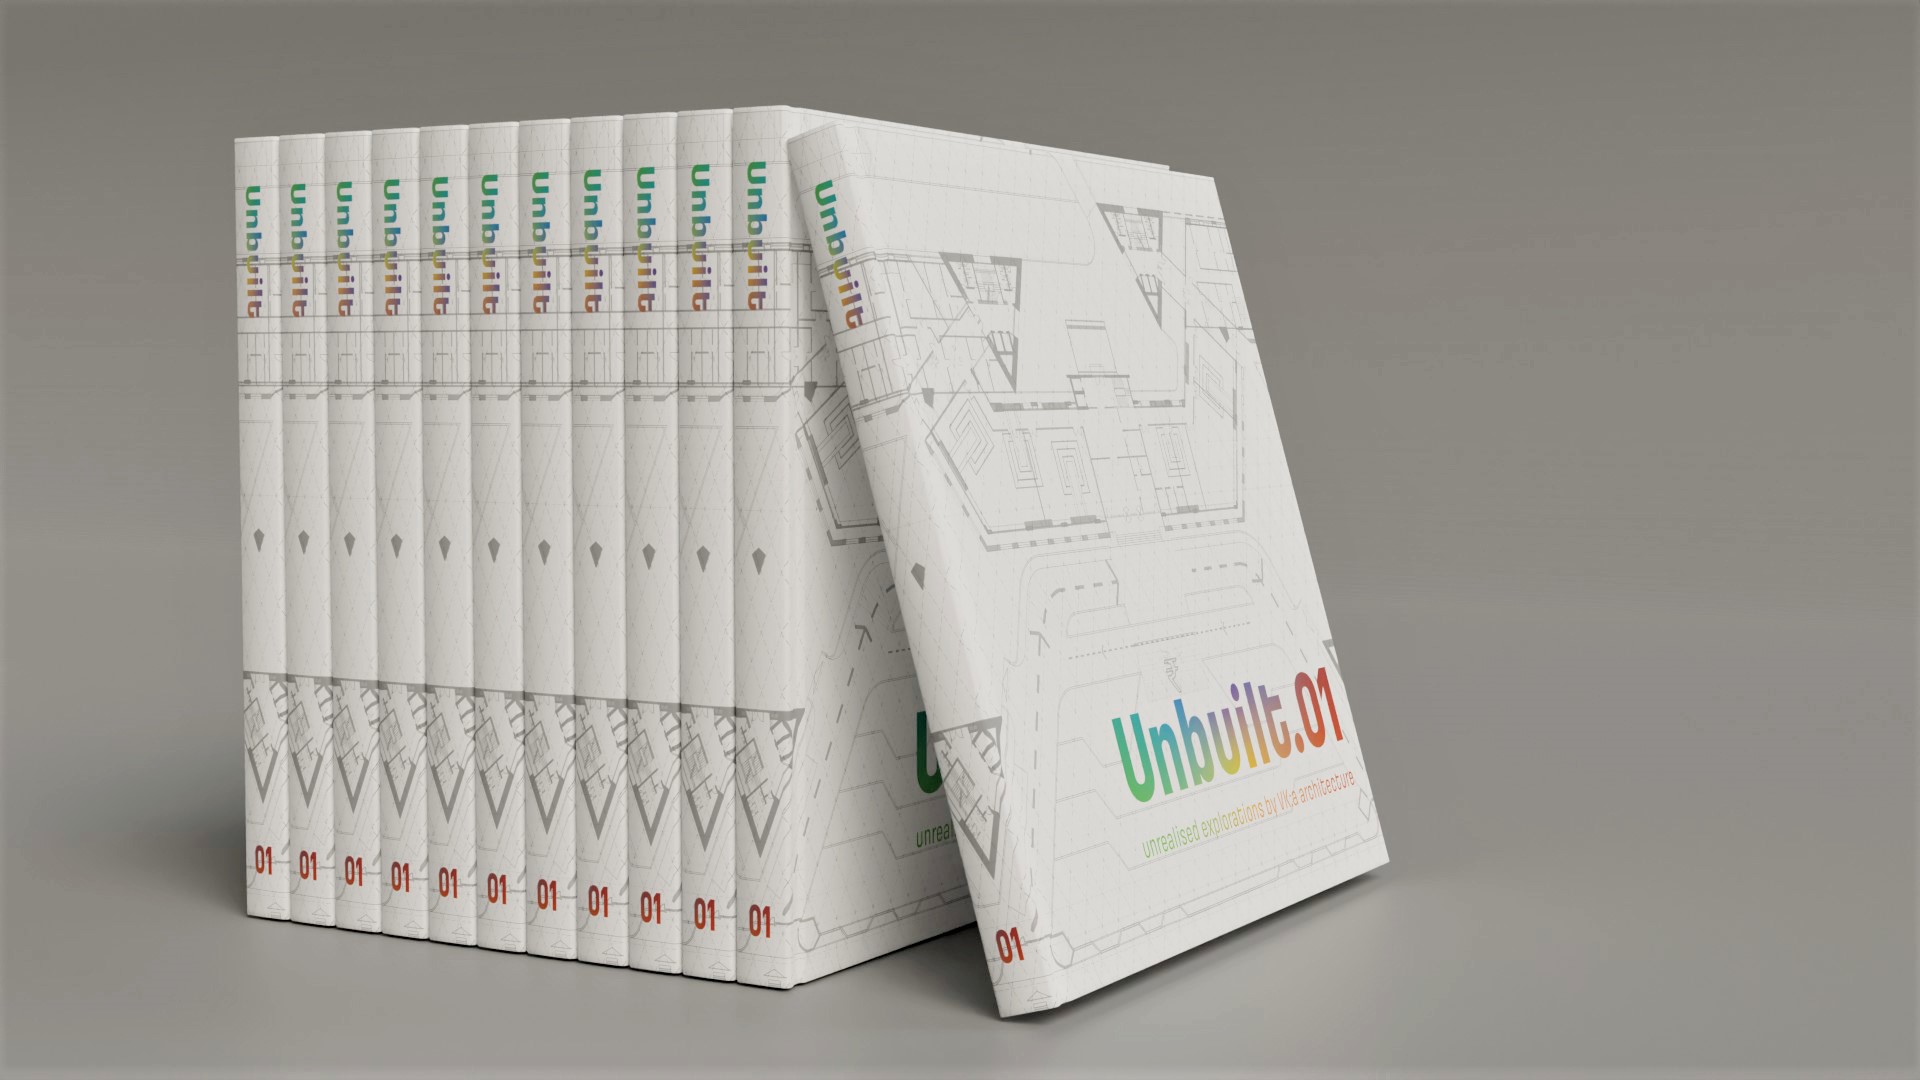 UNBUILT.01 Unrealised explorations by VK: a architecture by Narendra Dengle